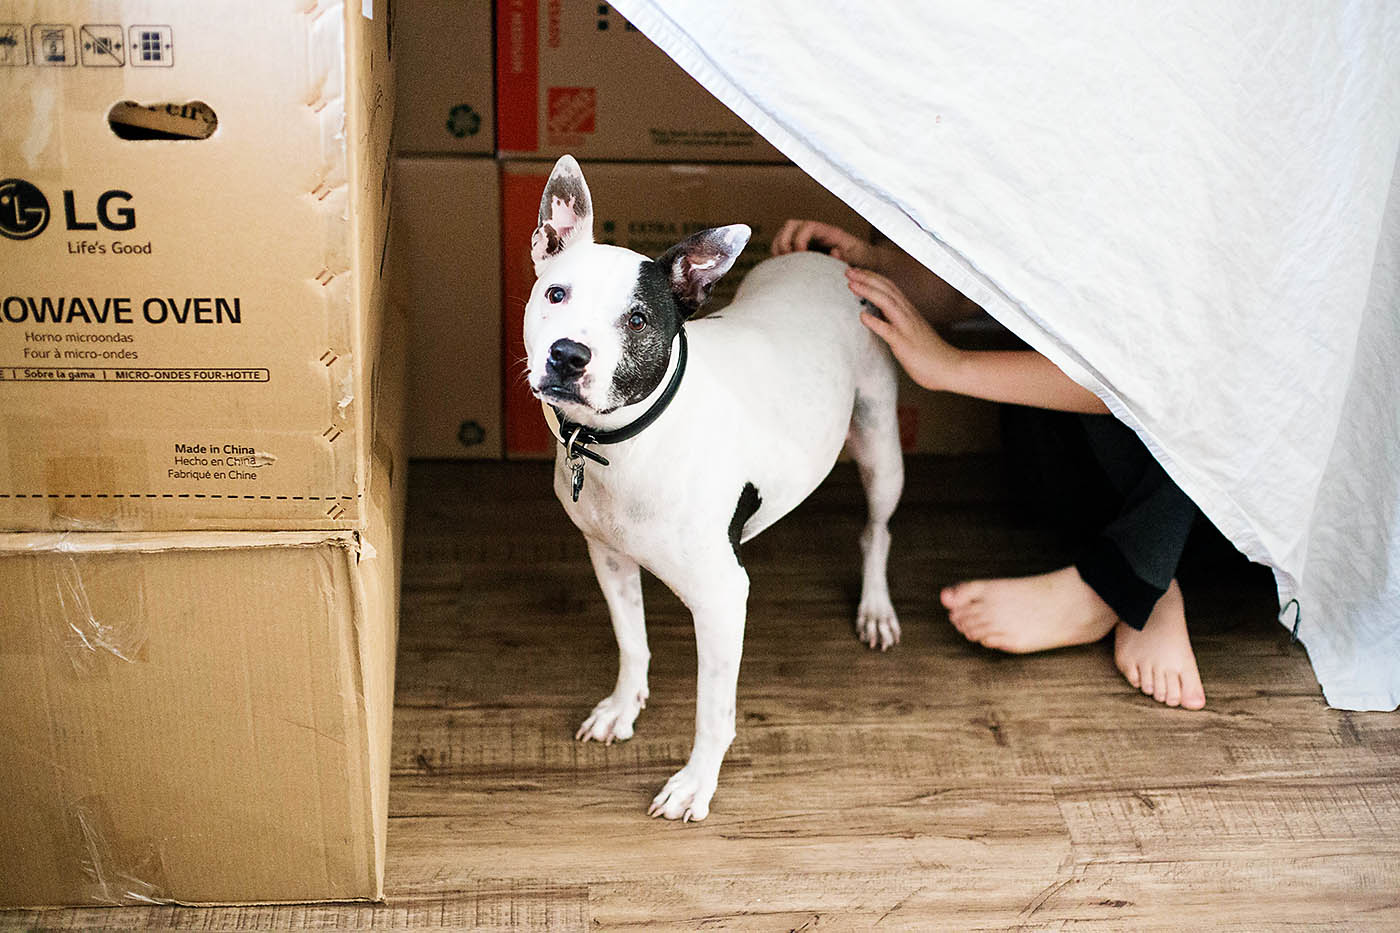 Easy moving box and sheet fort